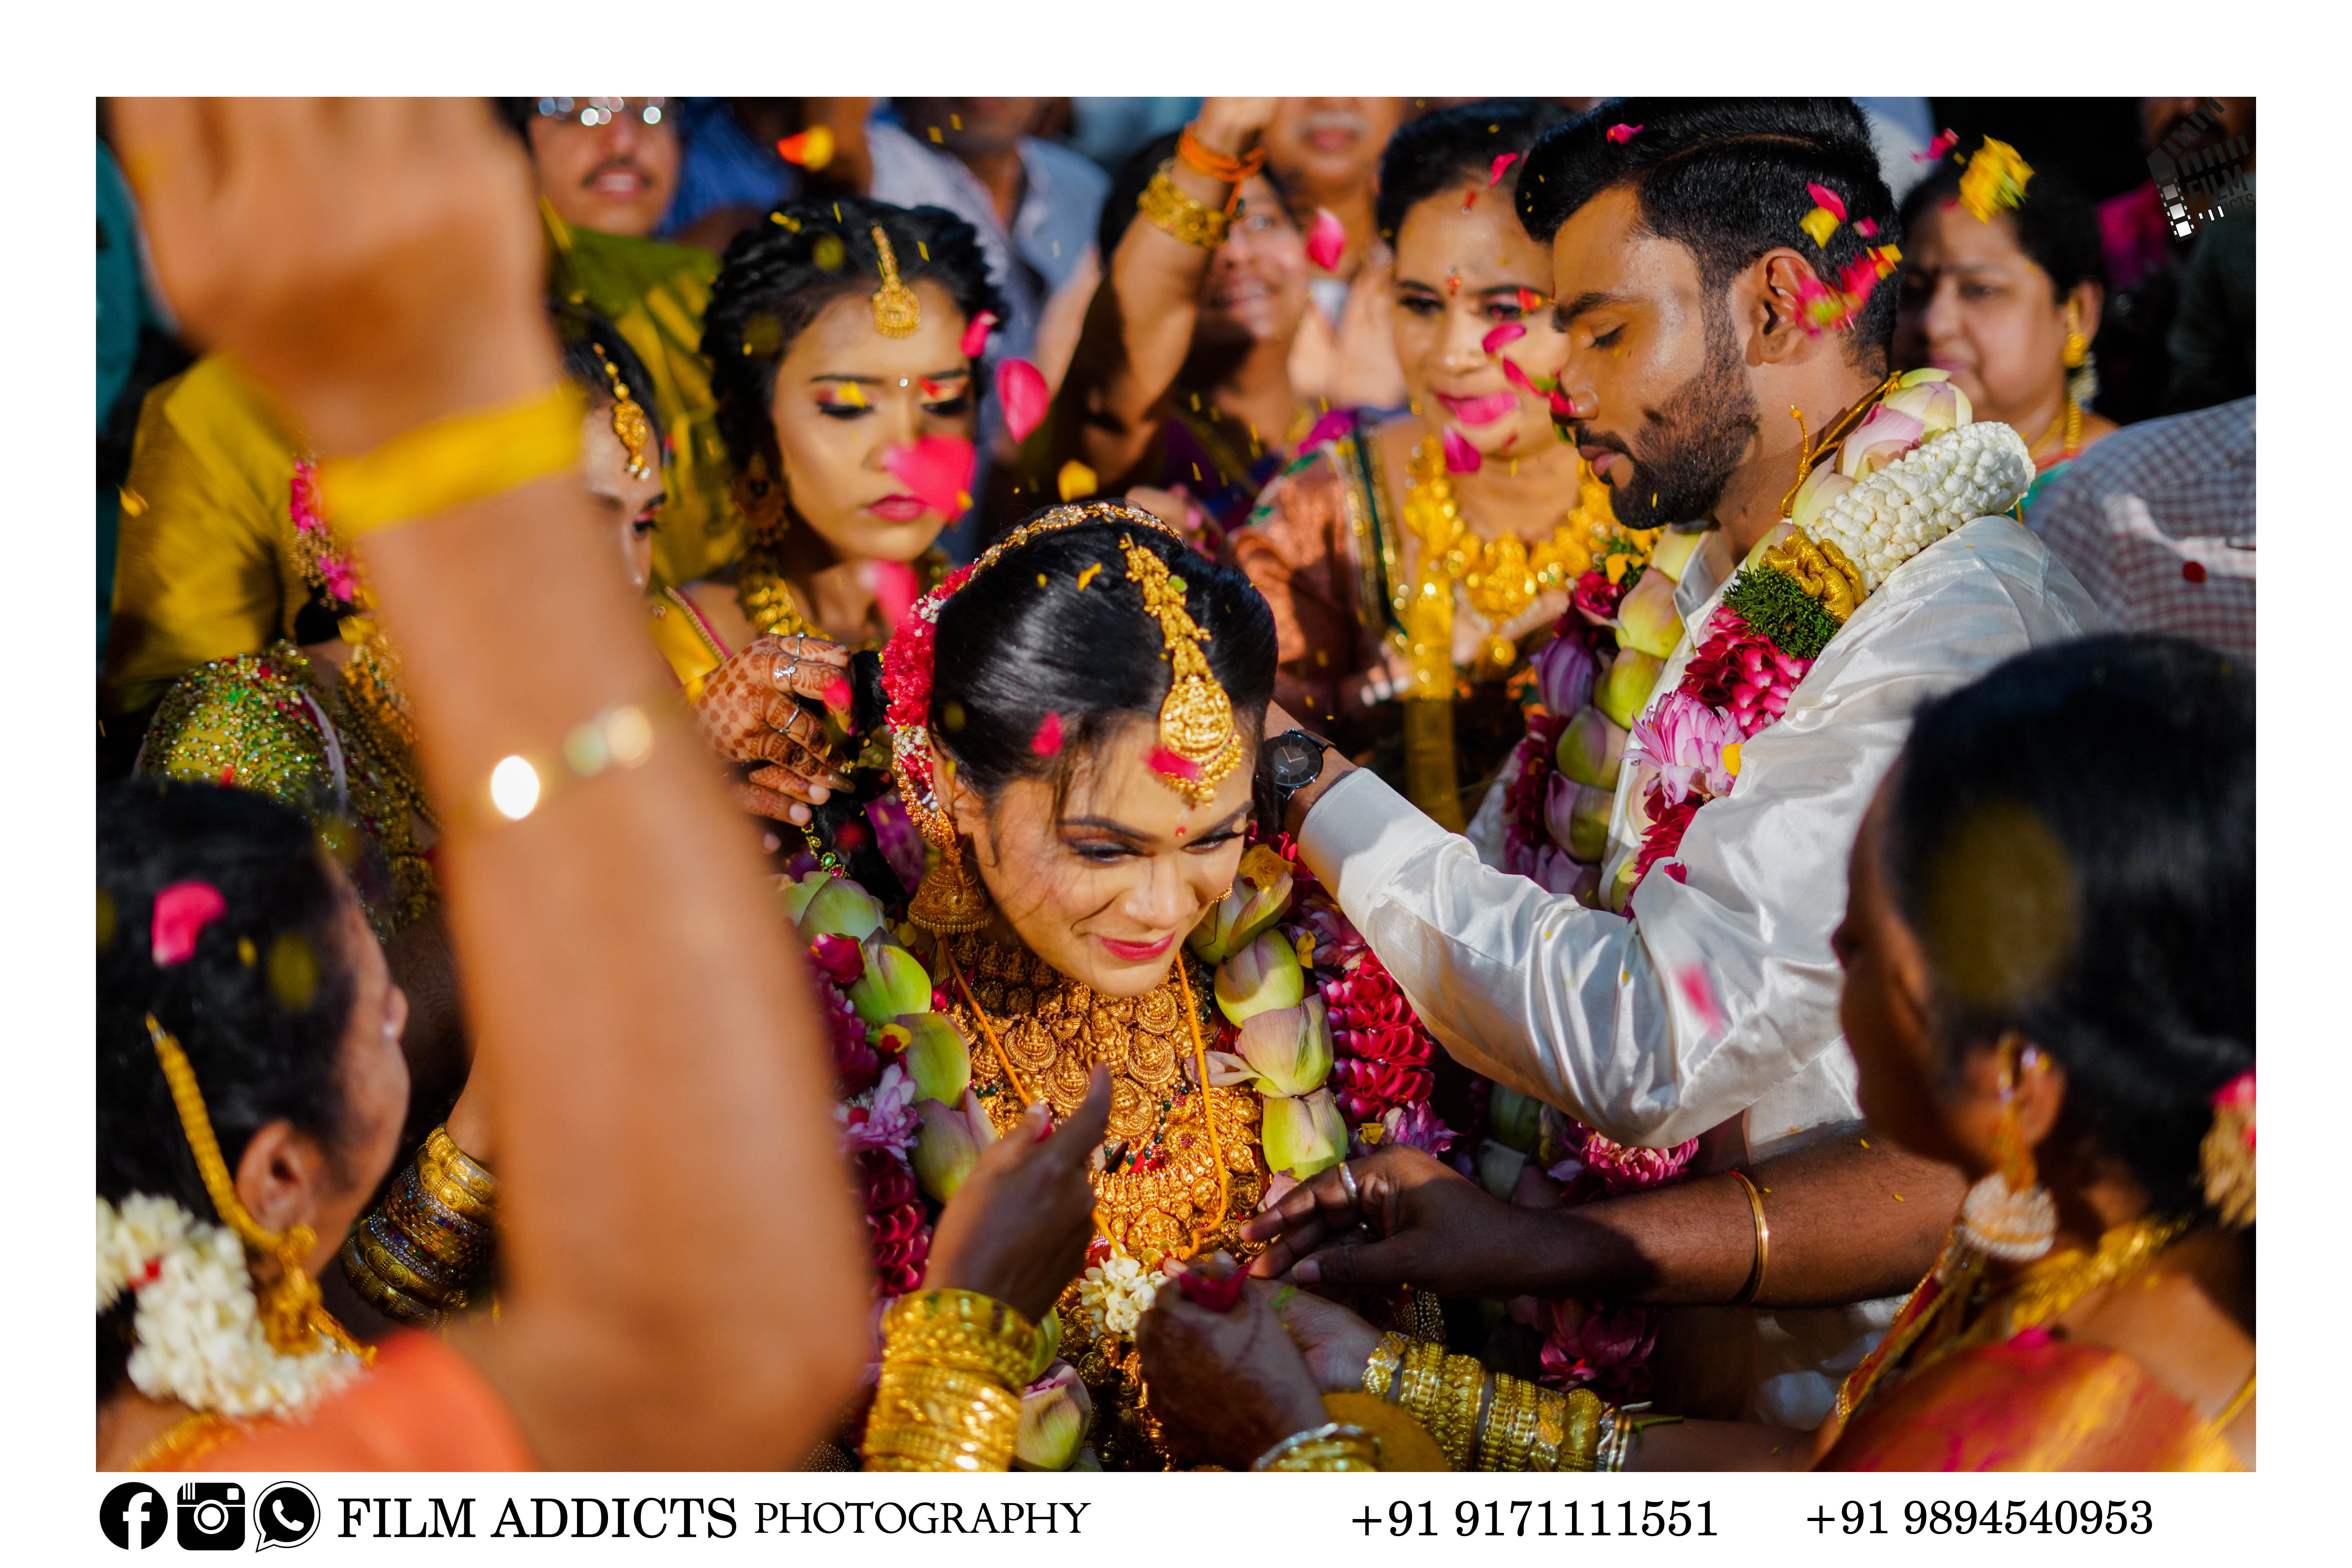 Best Candid Photographers in Karur-FilmAddicts Photography,Best wedding photographers in Karur,Best wedding photography in Karur,Best candid photographers in Karur,Best candid photography in Karur,Best marriage photographers in Karur,Best marriage photography in Karur,Best photographers in Karur,Best photography in Karur,Best wedding candid photography in Karur,Best wedding candid photographers in Karur,Best wedding video in Karur,Best wedding videographers in Karur,Best wedding videography in Karur,Best candid videographers in Karur,Best candid videography in Karur,Best marriage videographers in Karur,Best marriage videography in Karur,Best videographers in Karur,Best videography in Karur,Best wedding candid videography in Karur,Best wedding candid videographers in Karur,Best helicam operators in Karur,Best drone operators in Karur,Best wedding studio in Karur,Best professional photographers in Karur,Best professional photography in Karur,No.1 wedding photographers in Karur,No.1 wedding photography in Karur,Karur wedding photographers,Karur wedding photography,Karur wedding videos,Best candid videos in Karur,Best candid photos in Karur,Best helicam operators photography in Karur,Best helicam operator photographers in Karur,Best outdoor videography in Karur,Best professional wedding photography in Karur,Best outdoor photography in Karur,Best outdoor photographers in Karur,Best drone operators photographers in Karur,Best wedding candid videography in Karur,tamilnadu wedding photography, tamilnadu.